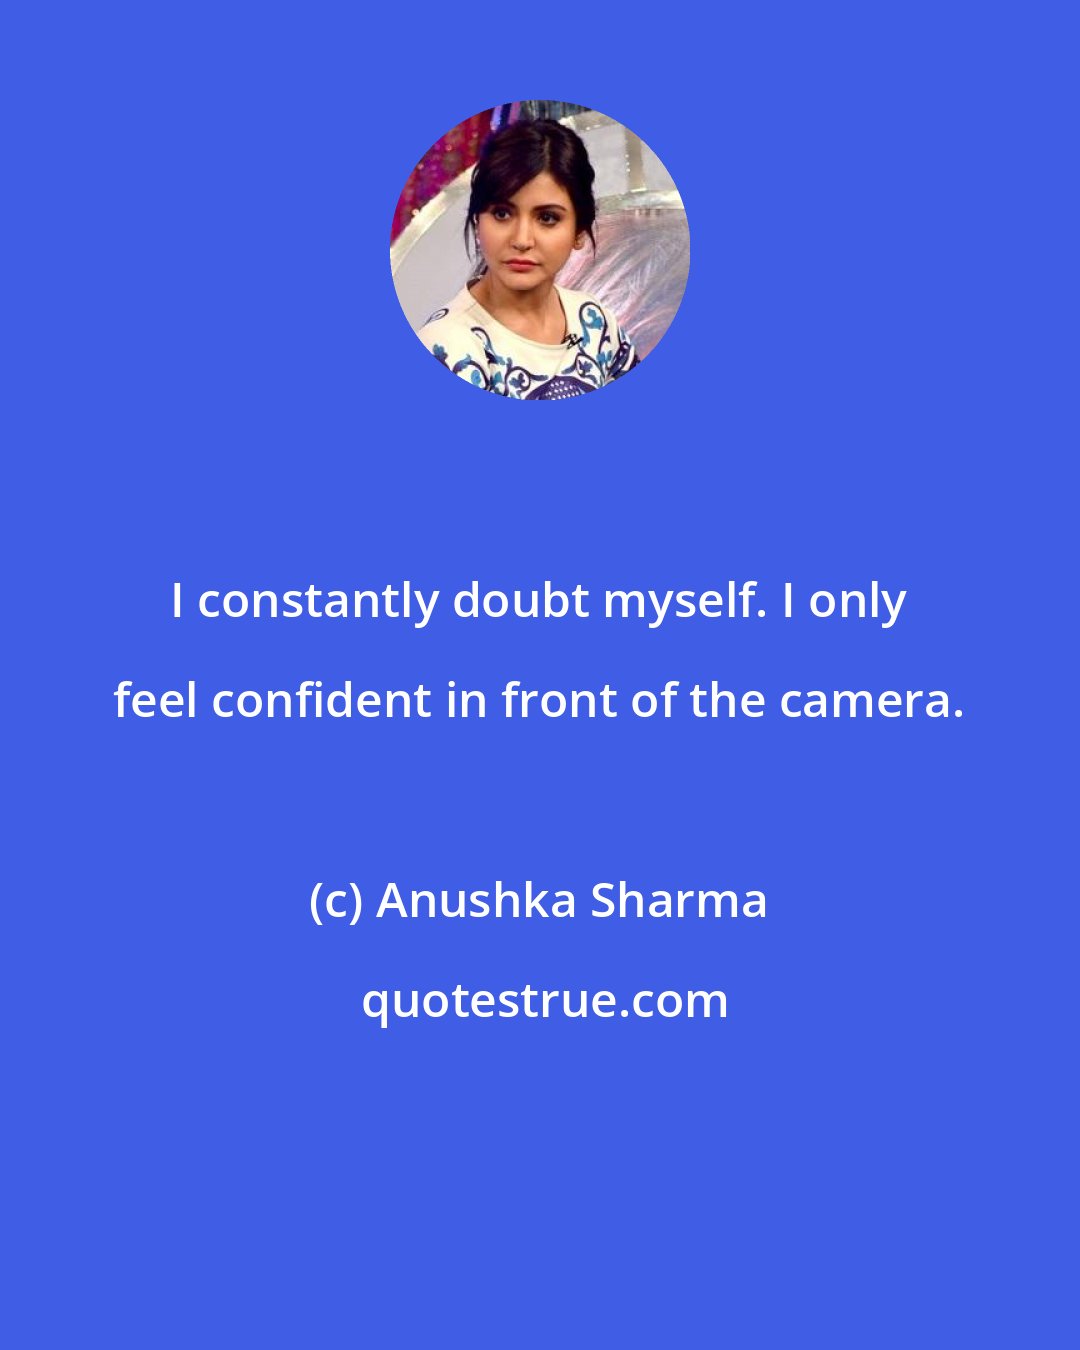 Anushka Sharma: I constantly doubt myself. I only feel confident in front of the camera.